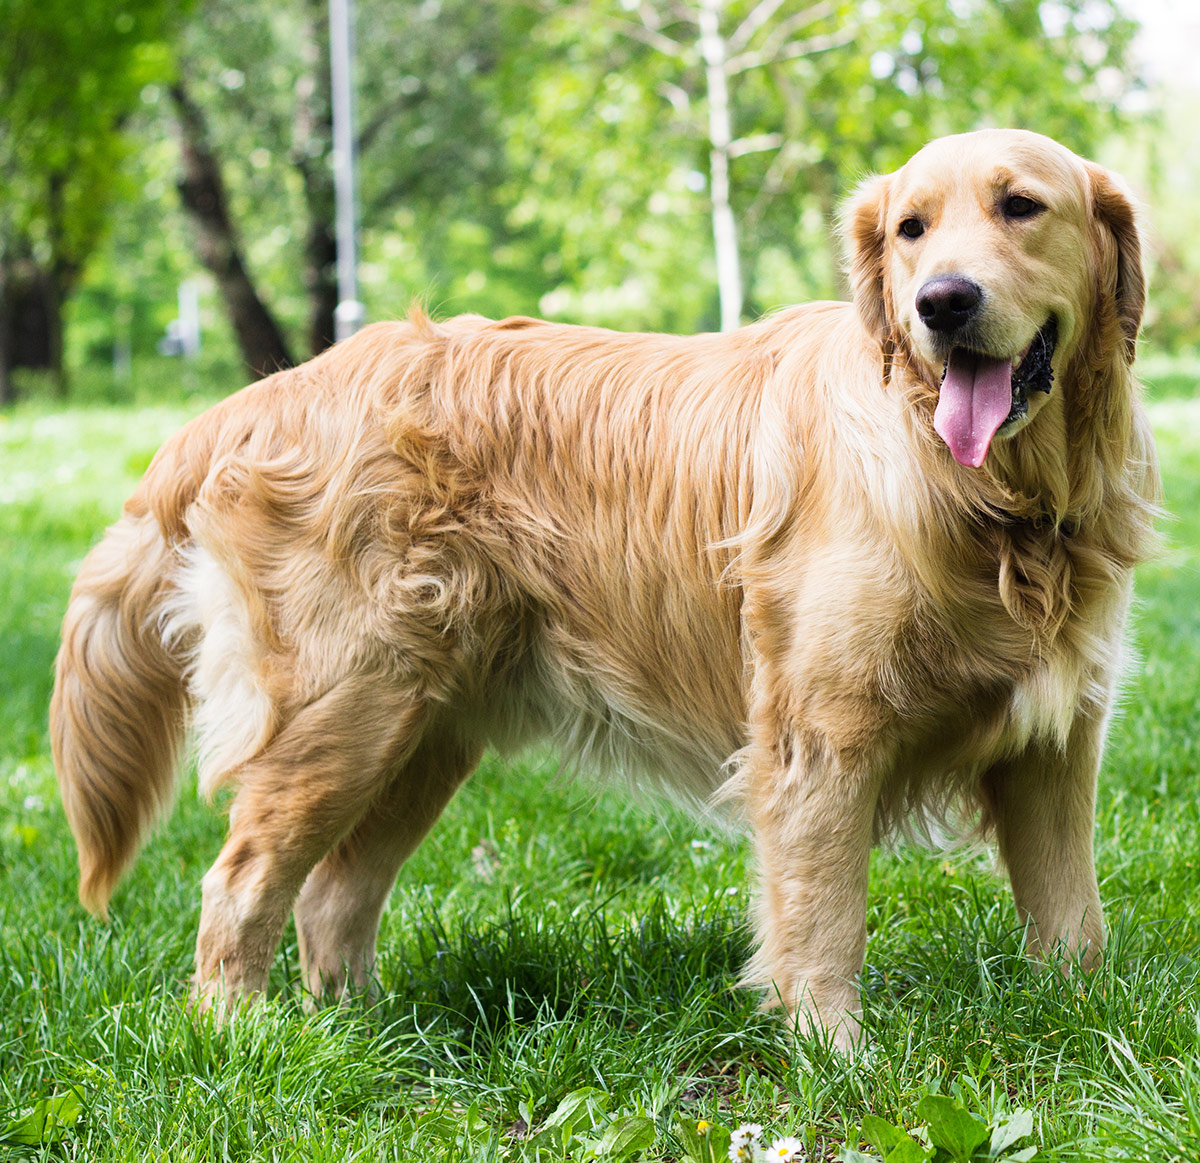 Pictures of Golden Retrievers outdoors